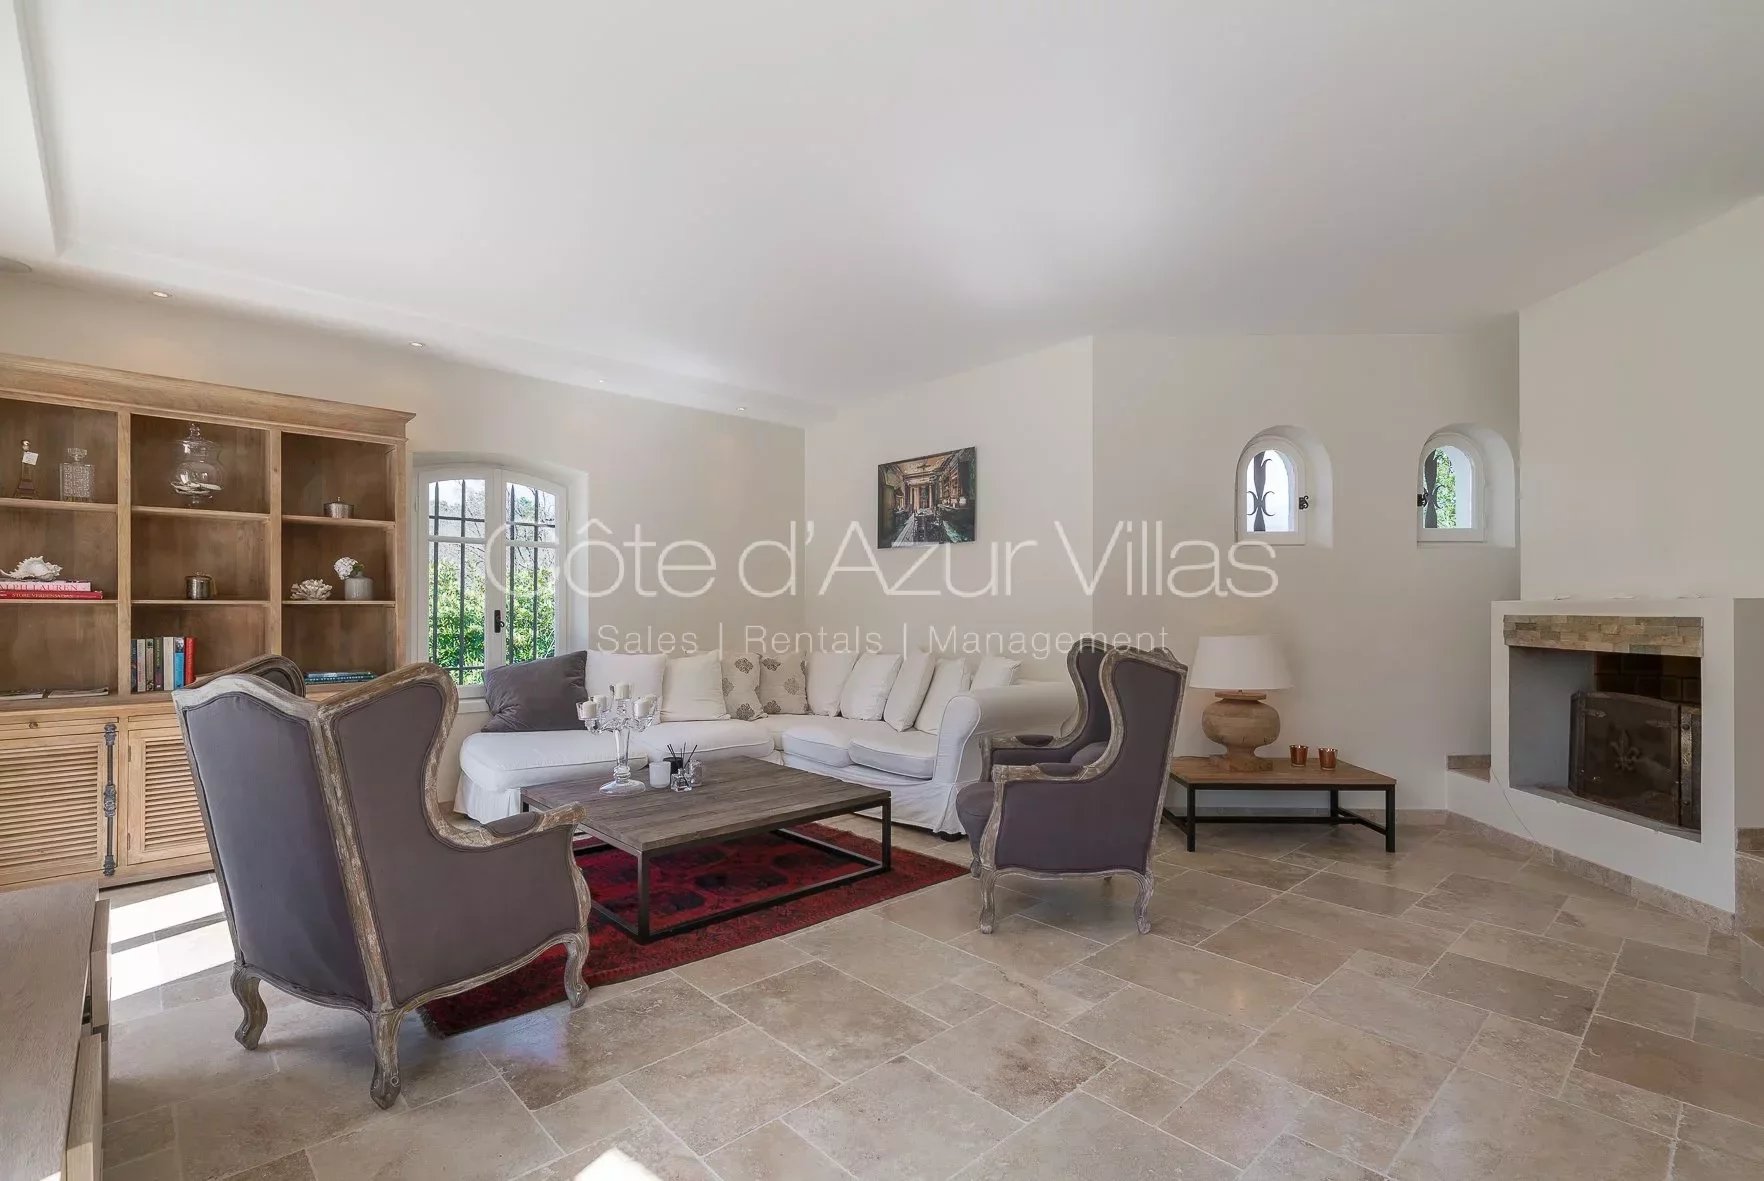 Valbonne - Beautifully renovated villa walking distance from the village